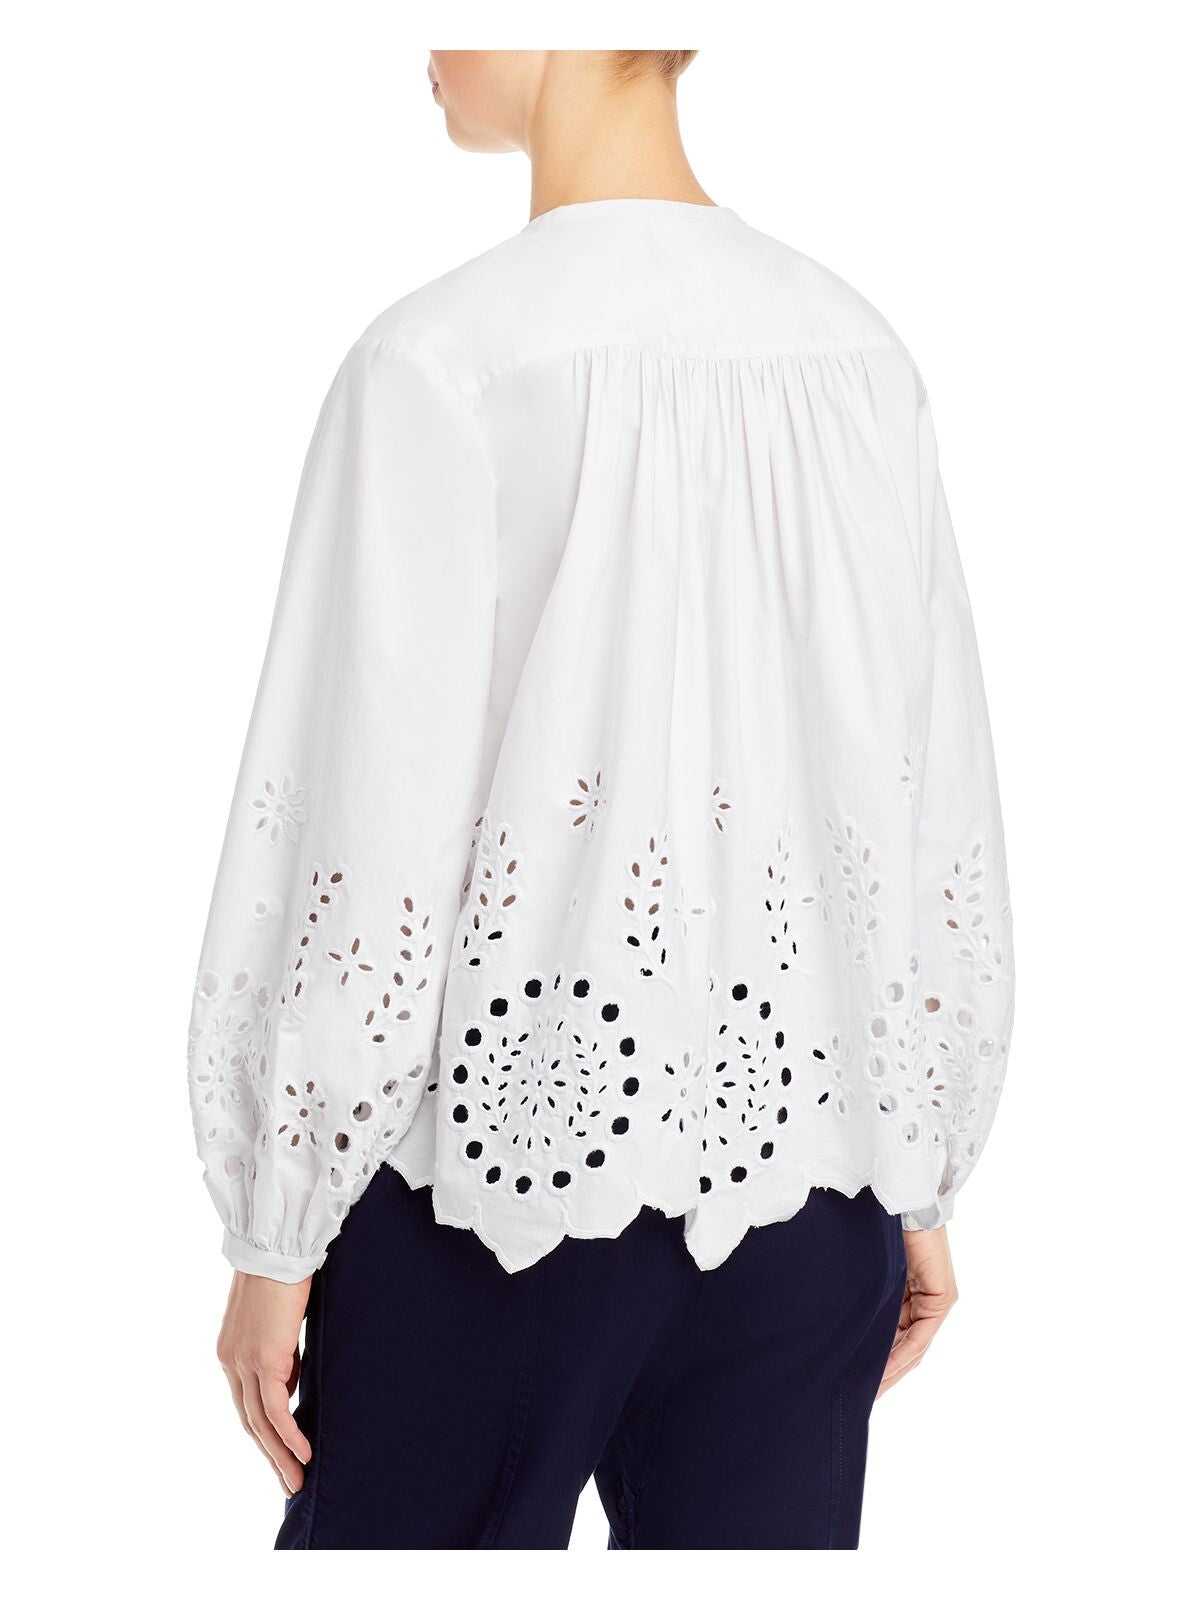 DEREK LAM 10 CROSBY Womens White Eyelet Pleated Button Front Unlined Long Sleeve Crew Neck Blouse 0